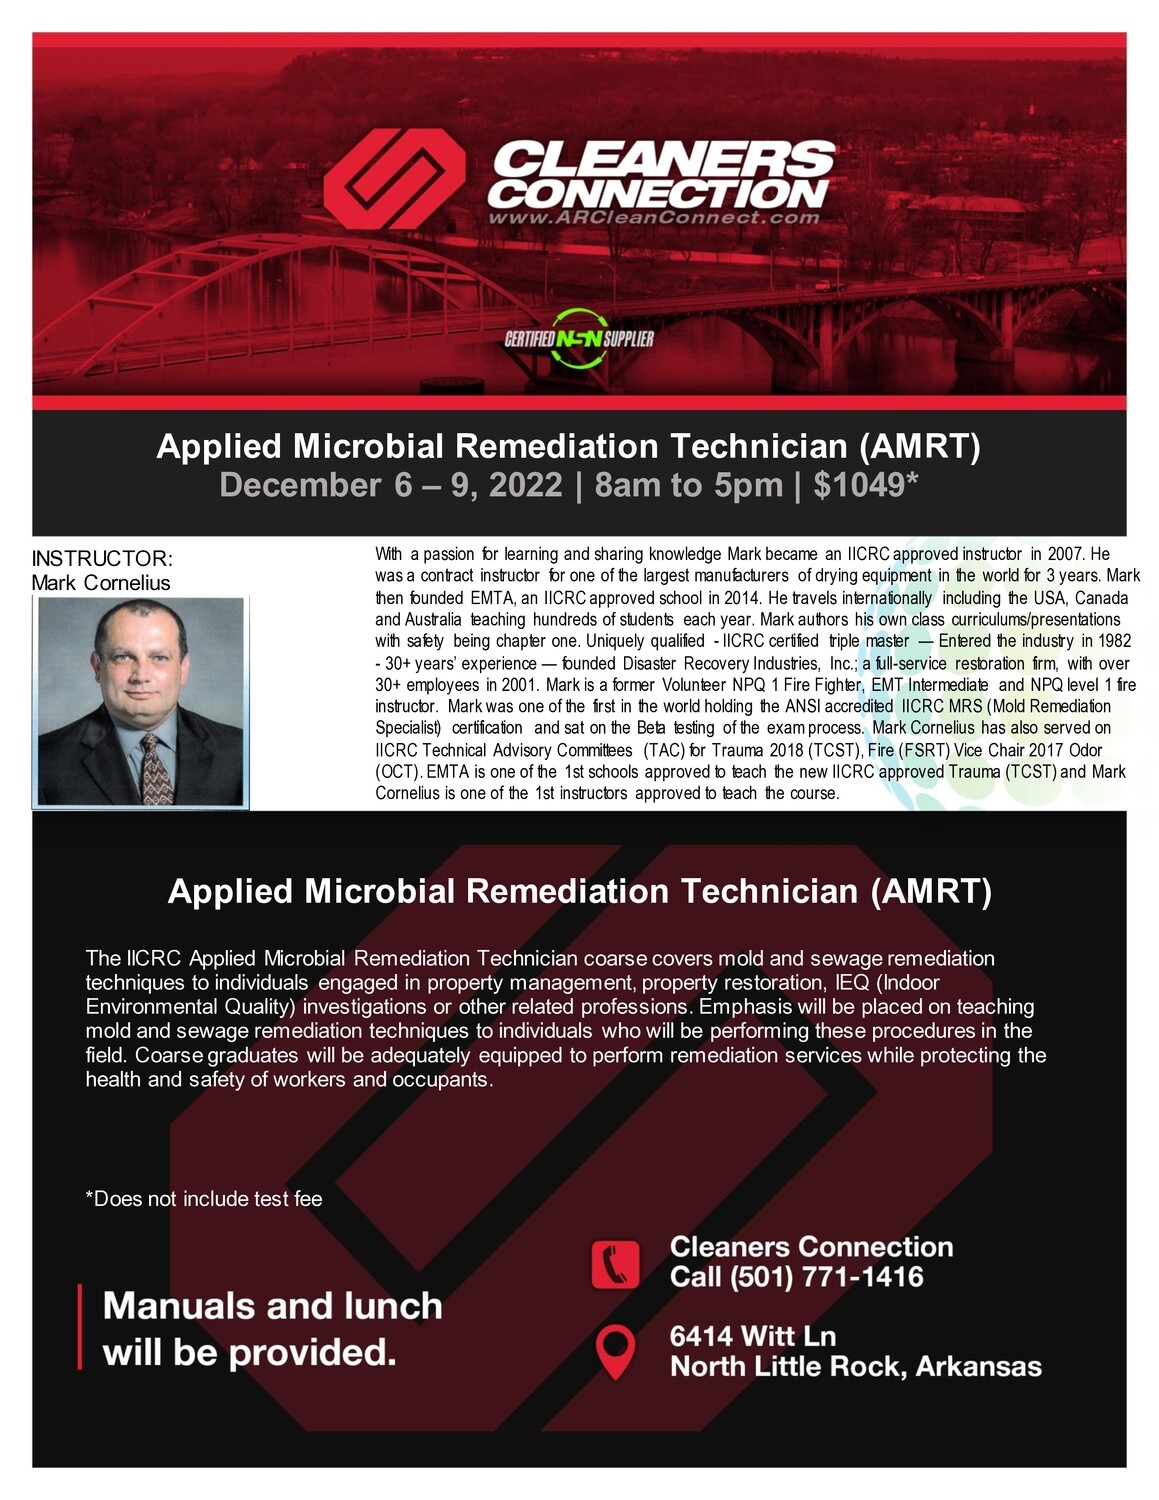 Sold Out Applied Microbial Remediation Technician (AMRT) Course 12/6/22 To 12/9/22